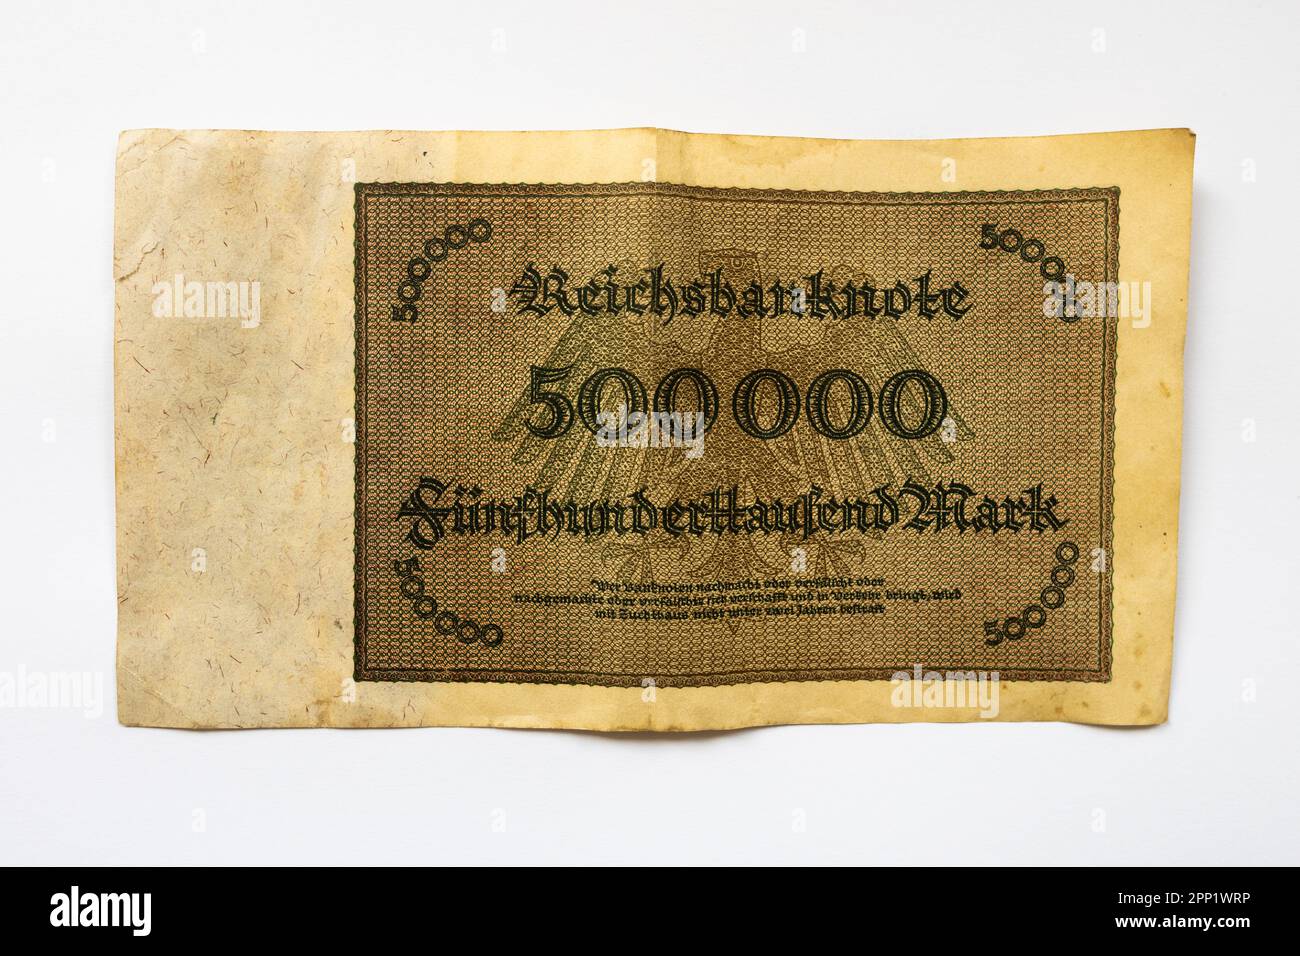 Fünfhunderttausend Mark (five hundred thousand Mark) banknote from the hyperinflation in May 1923. Antique money from the biggest devaluation of cash. Stock Photo